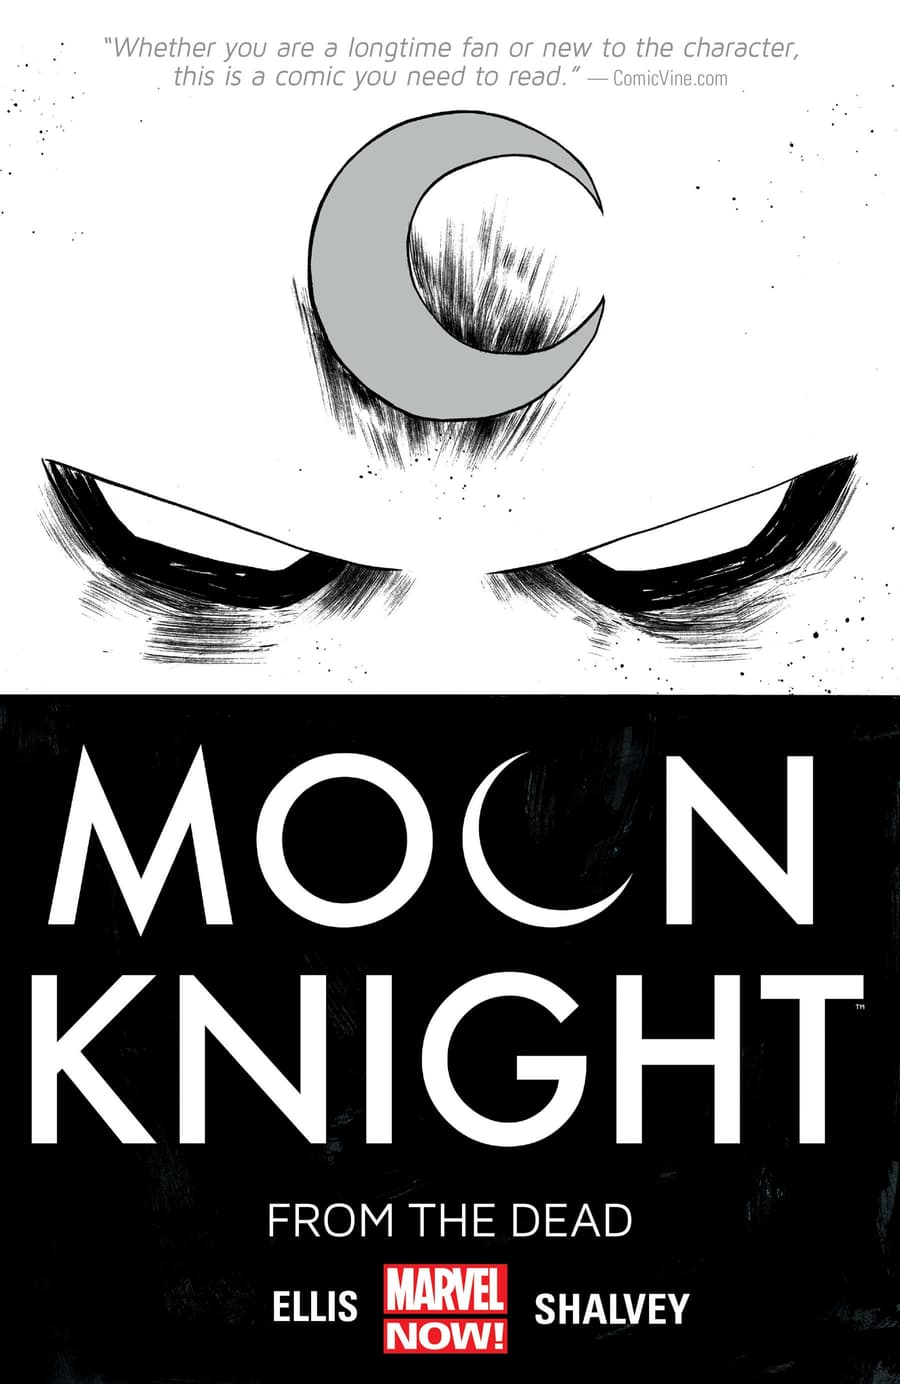 Cover to MOON KNIGHT VOL. 1: FROM THE DEAD.